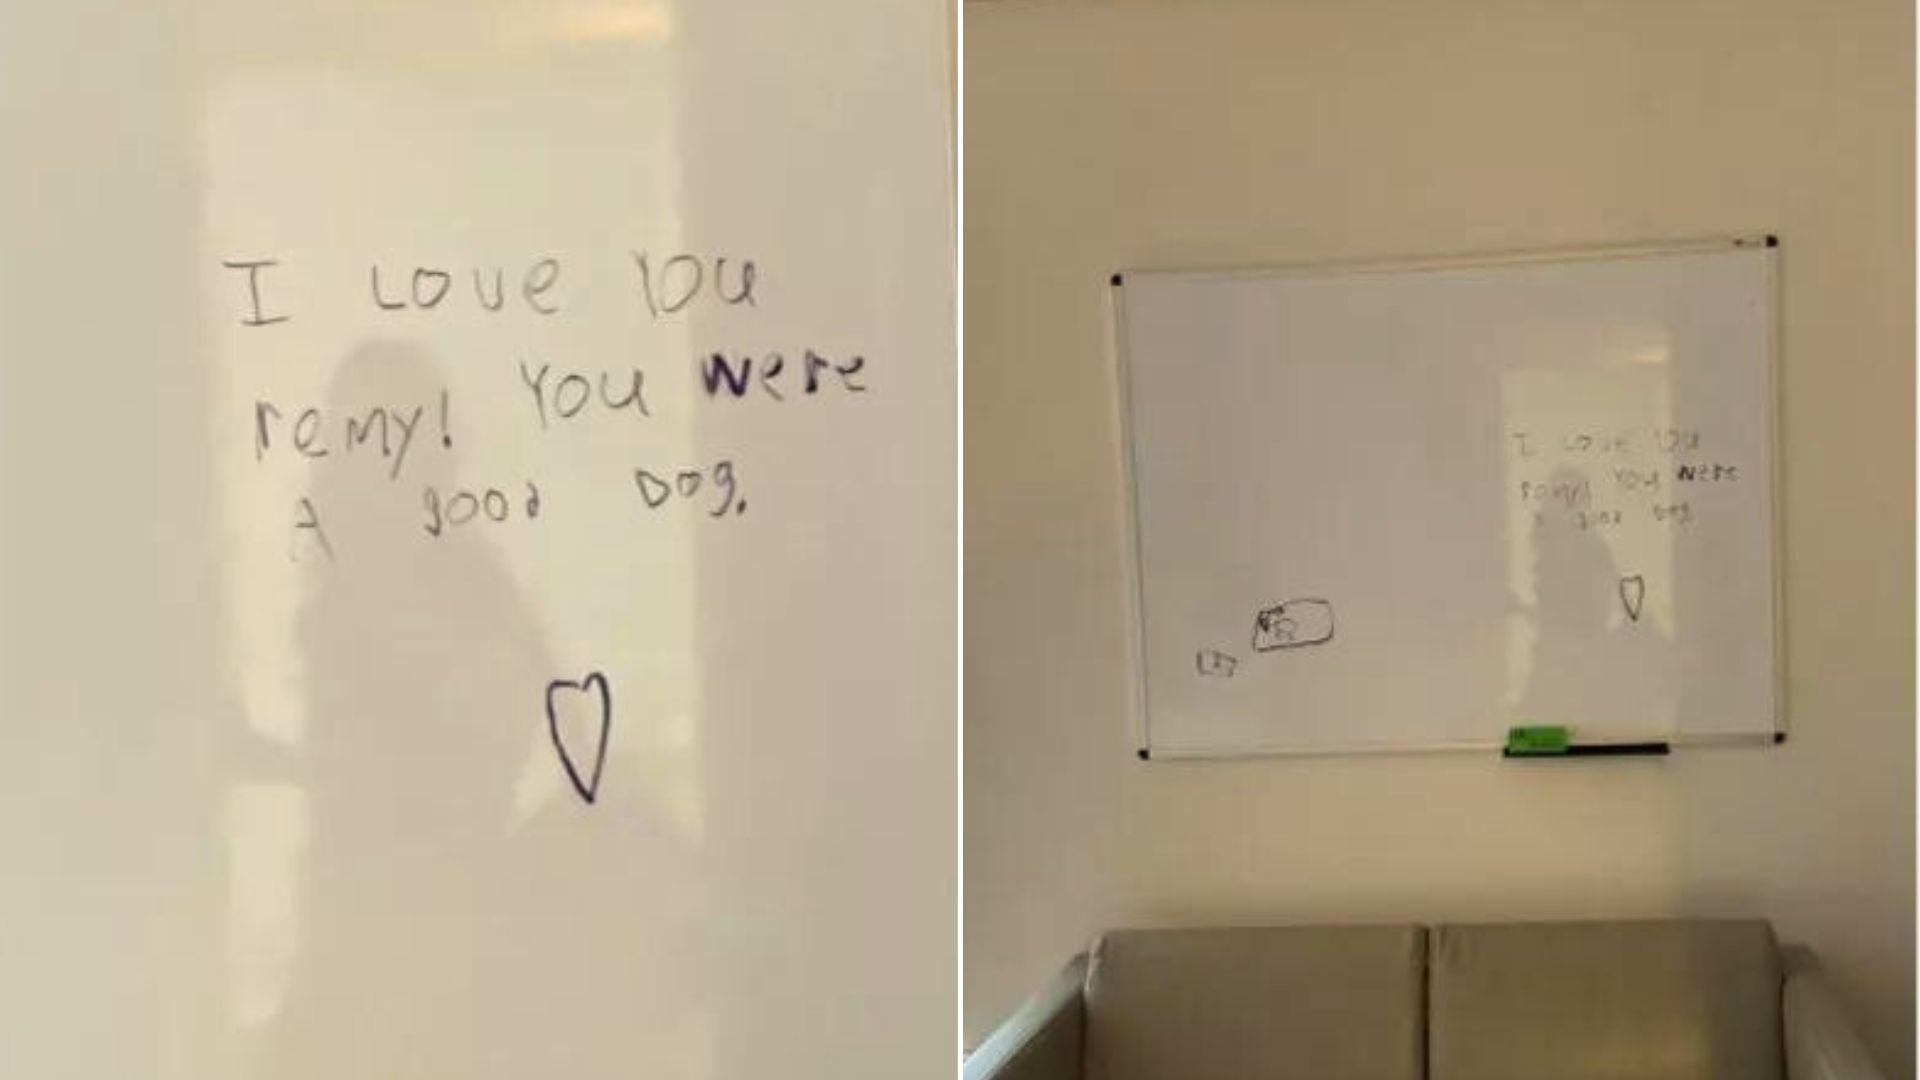 A Grieving Child Left A Message On A Vet Office And It’s Absolutely Heartbreaking